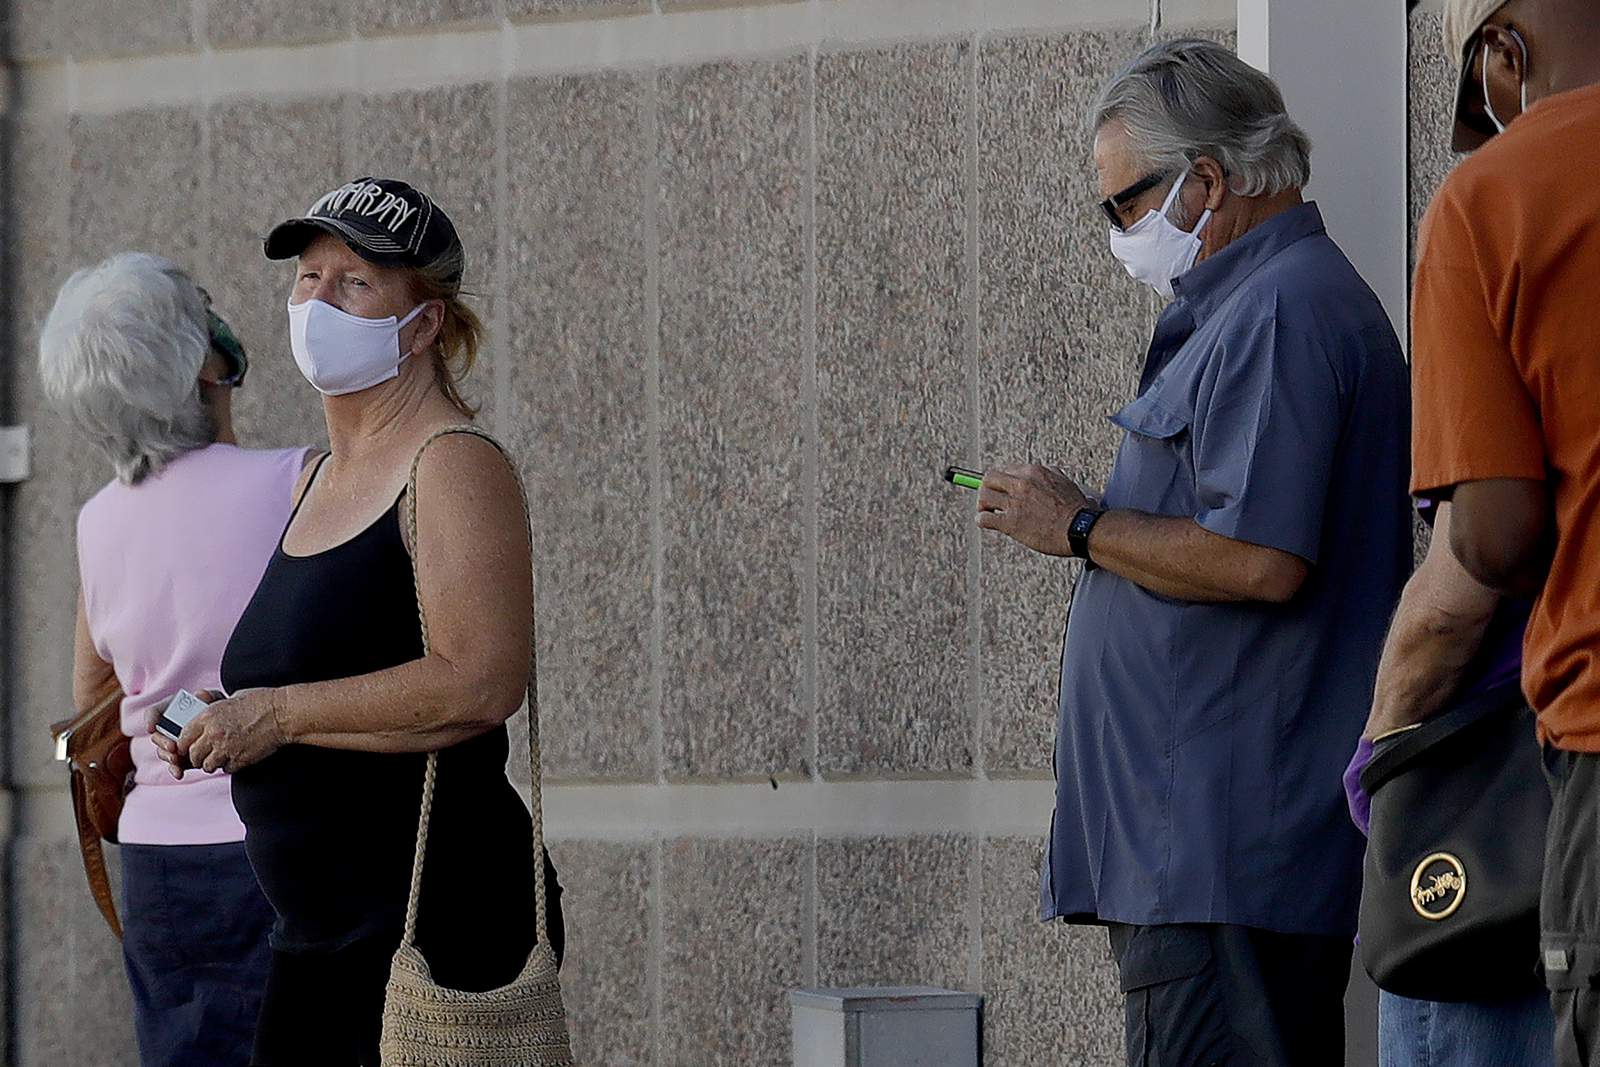 Galveston city residents will be under a mask order effective midnight, officials announce